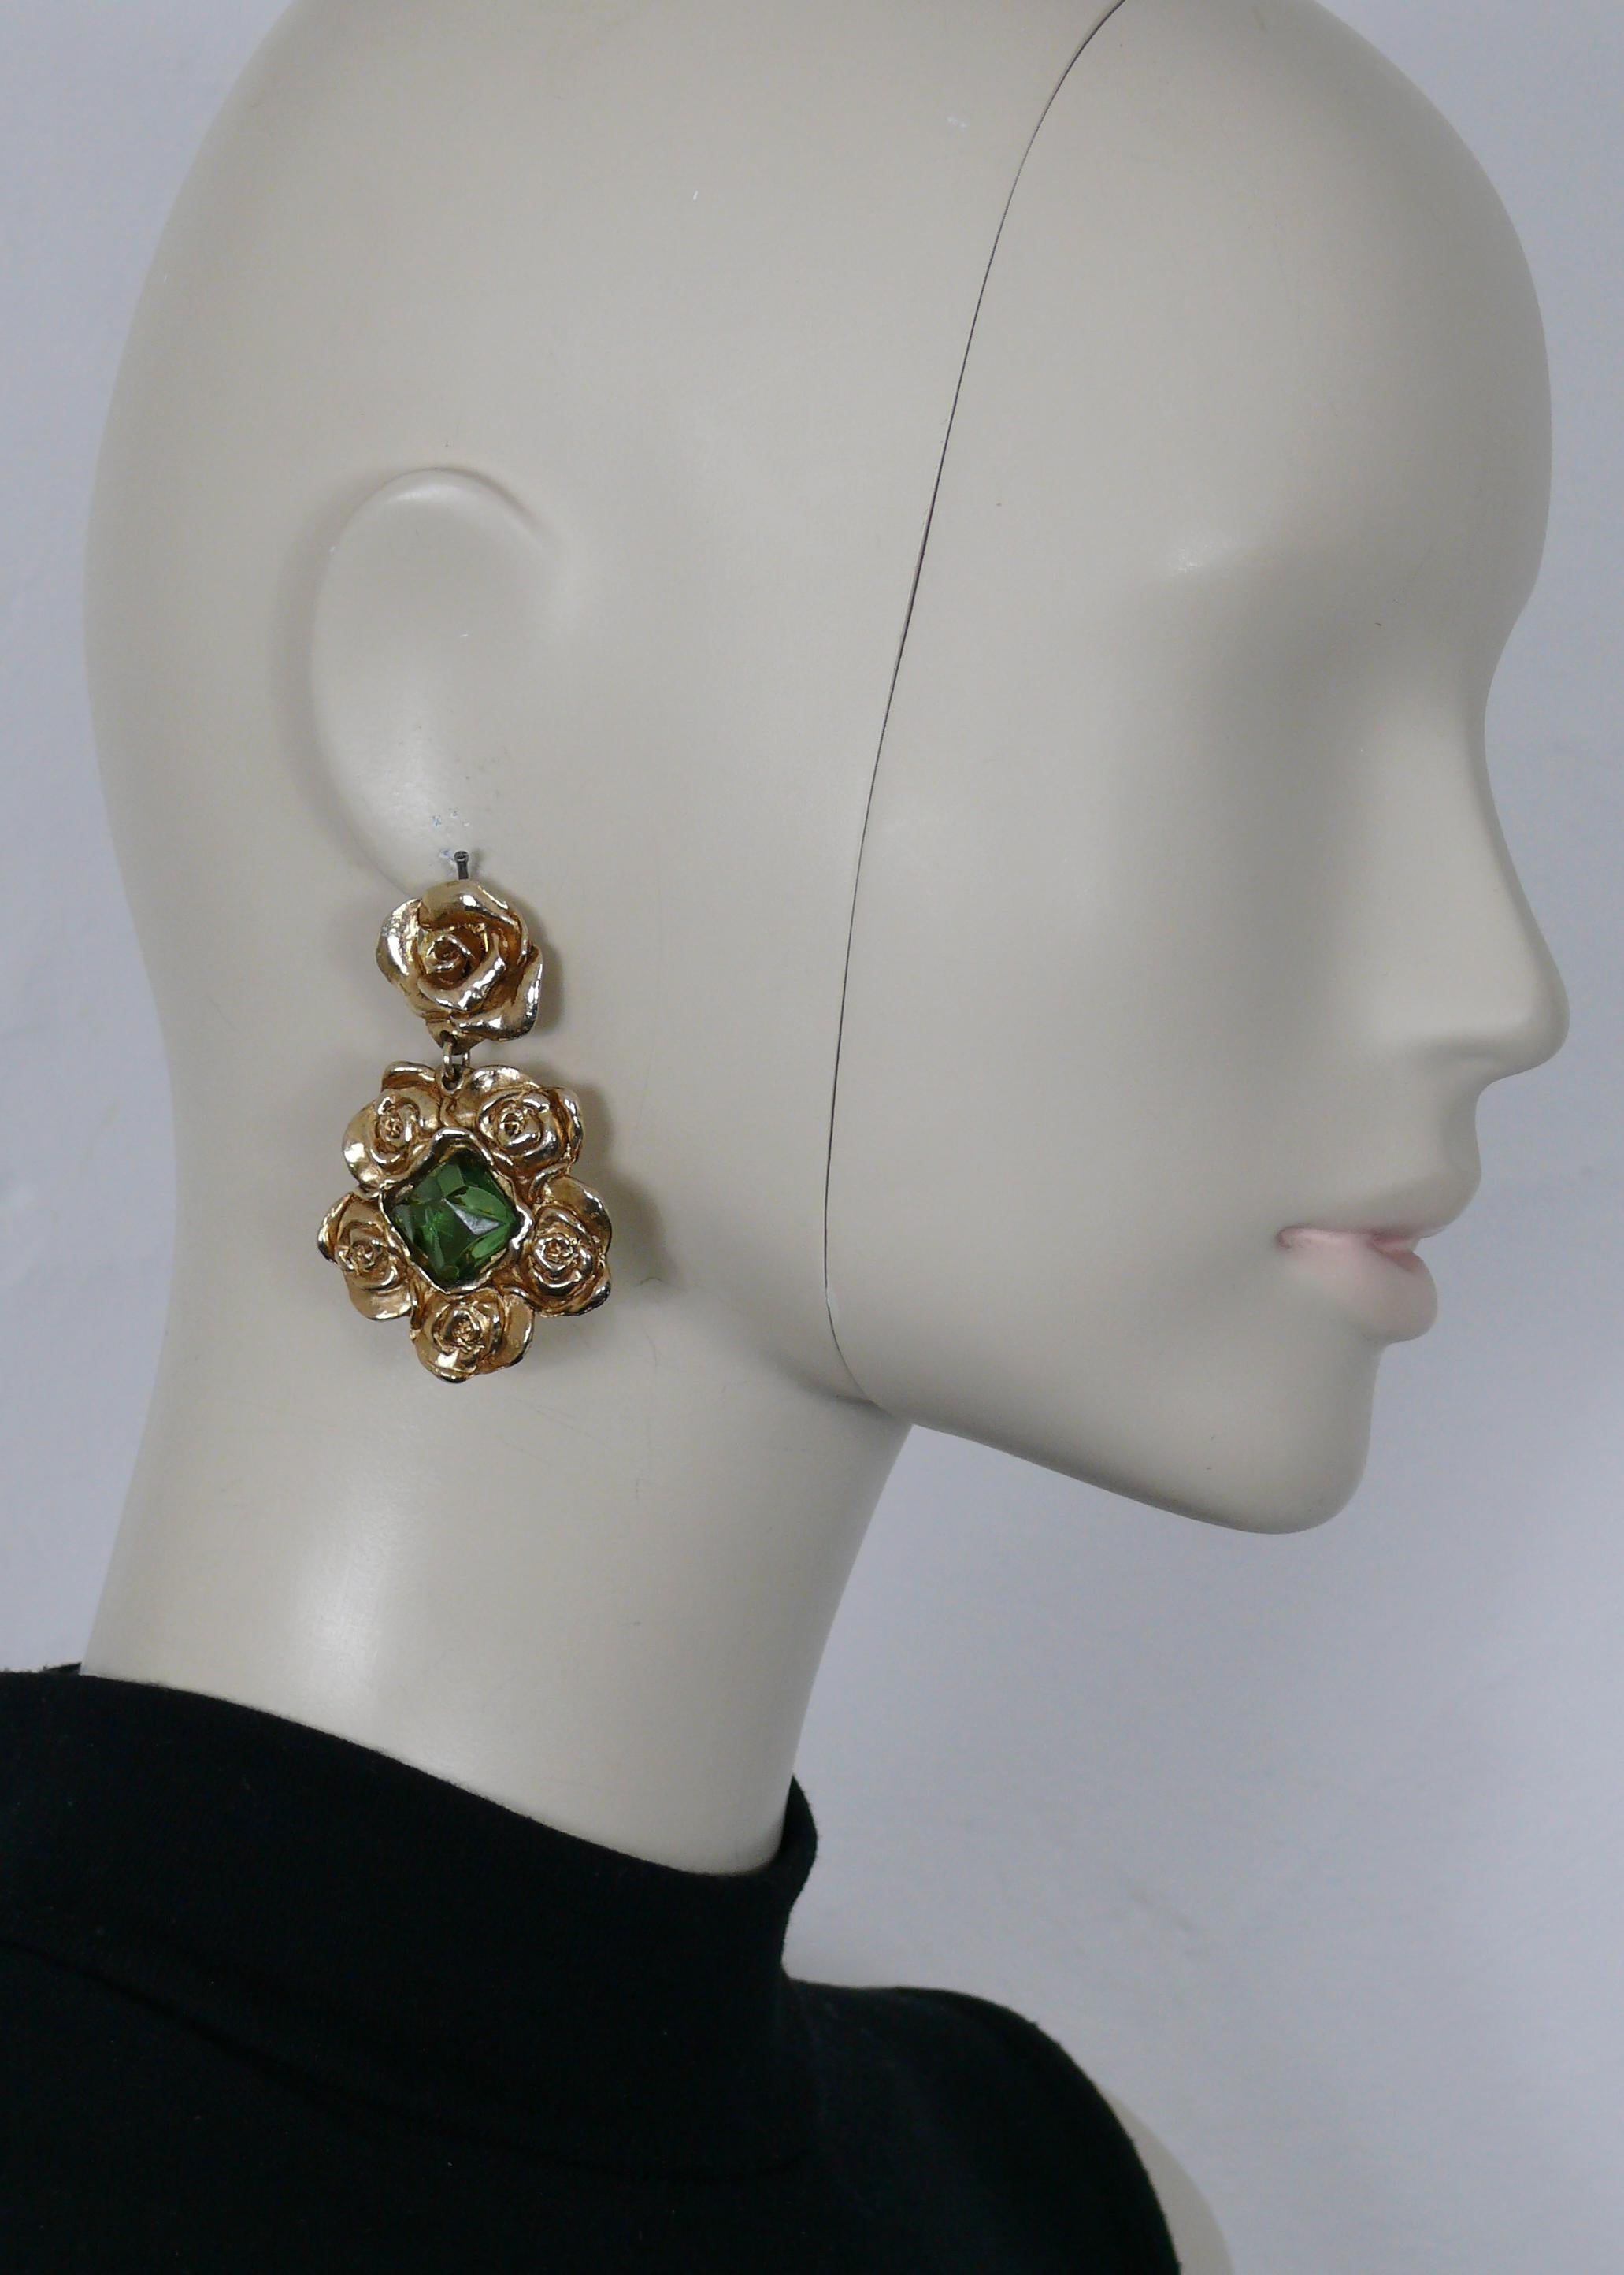 LA ROSE POURPRE Paris vintage gold tone floral dangling earrings (clip-on) embellished with a green resin cabochon.

Embossed LA ROSE POURPRE Paris.

Indicative measurements : height approx. 6 cm (2.36 inches) / max width approx. 3.8 cm (1.50